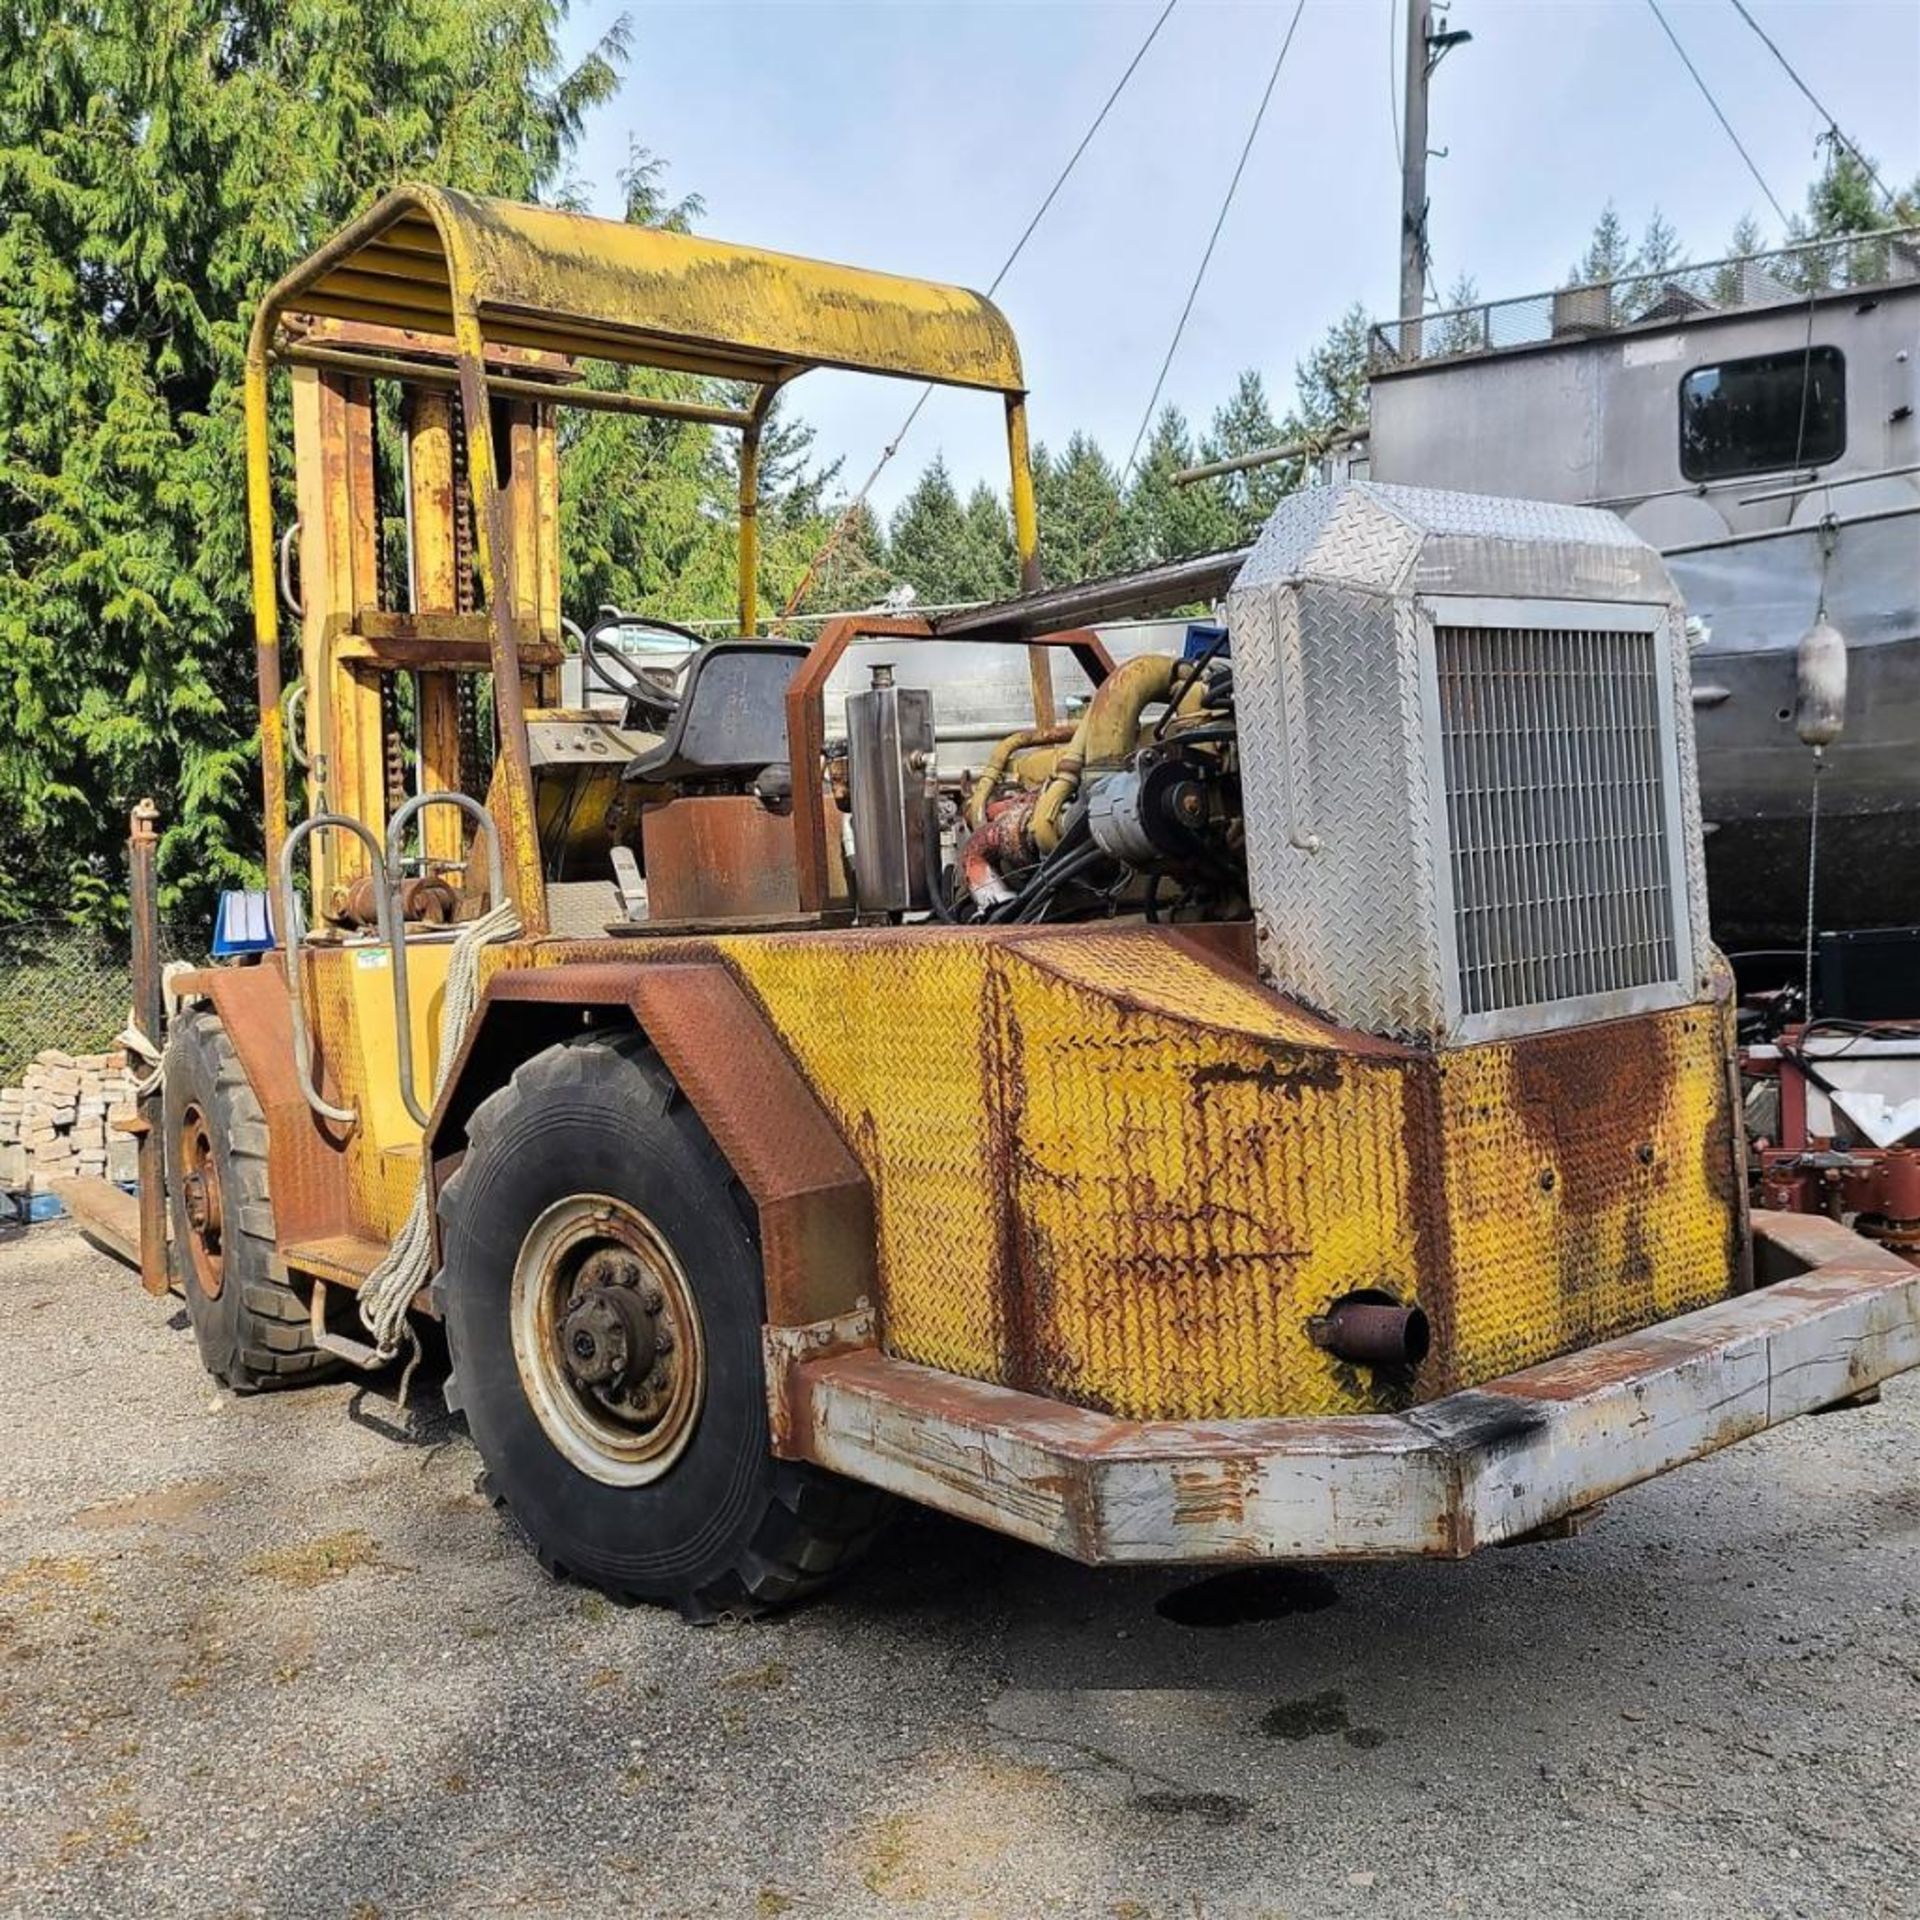 FORKLIFT - ACME 10 TON, 4X4, 466 IHC DIESEL, ARTICULATED (NO REMOVAL BEFORE MAY 4, 2021) - Image 3 of 10